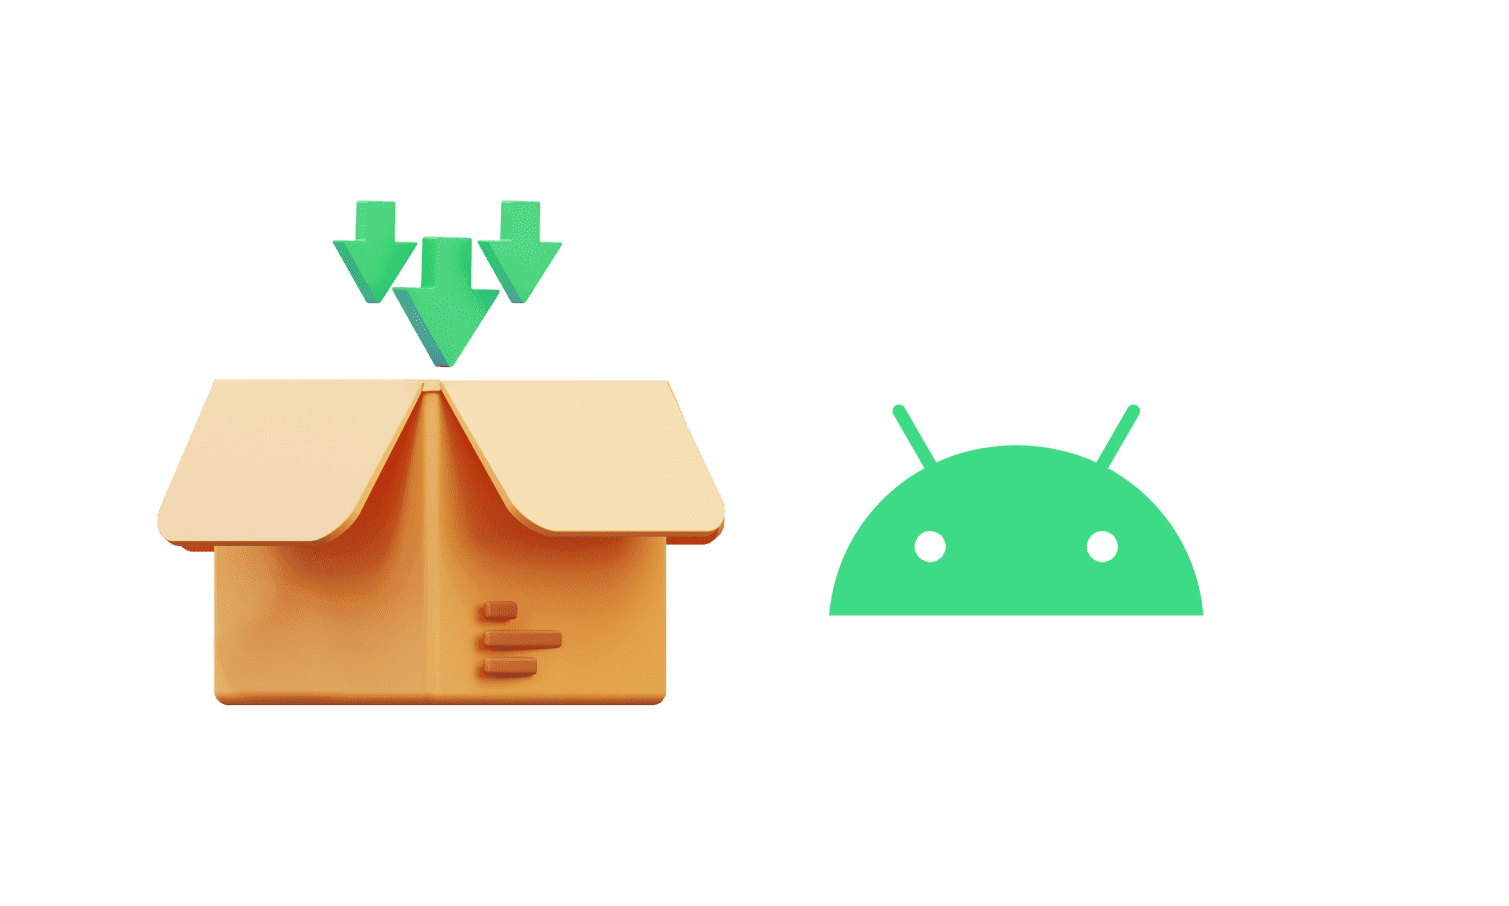 Build an Android app with Jetpack Compose and Firebase